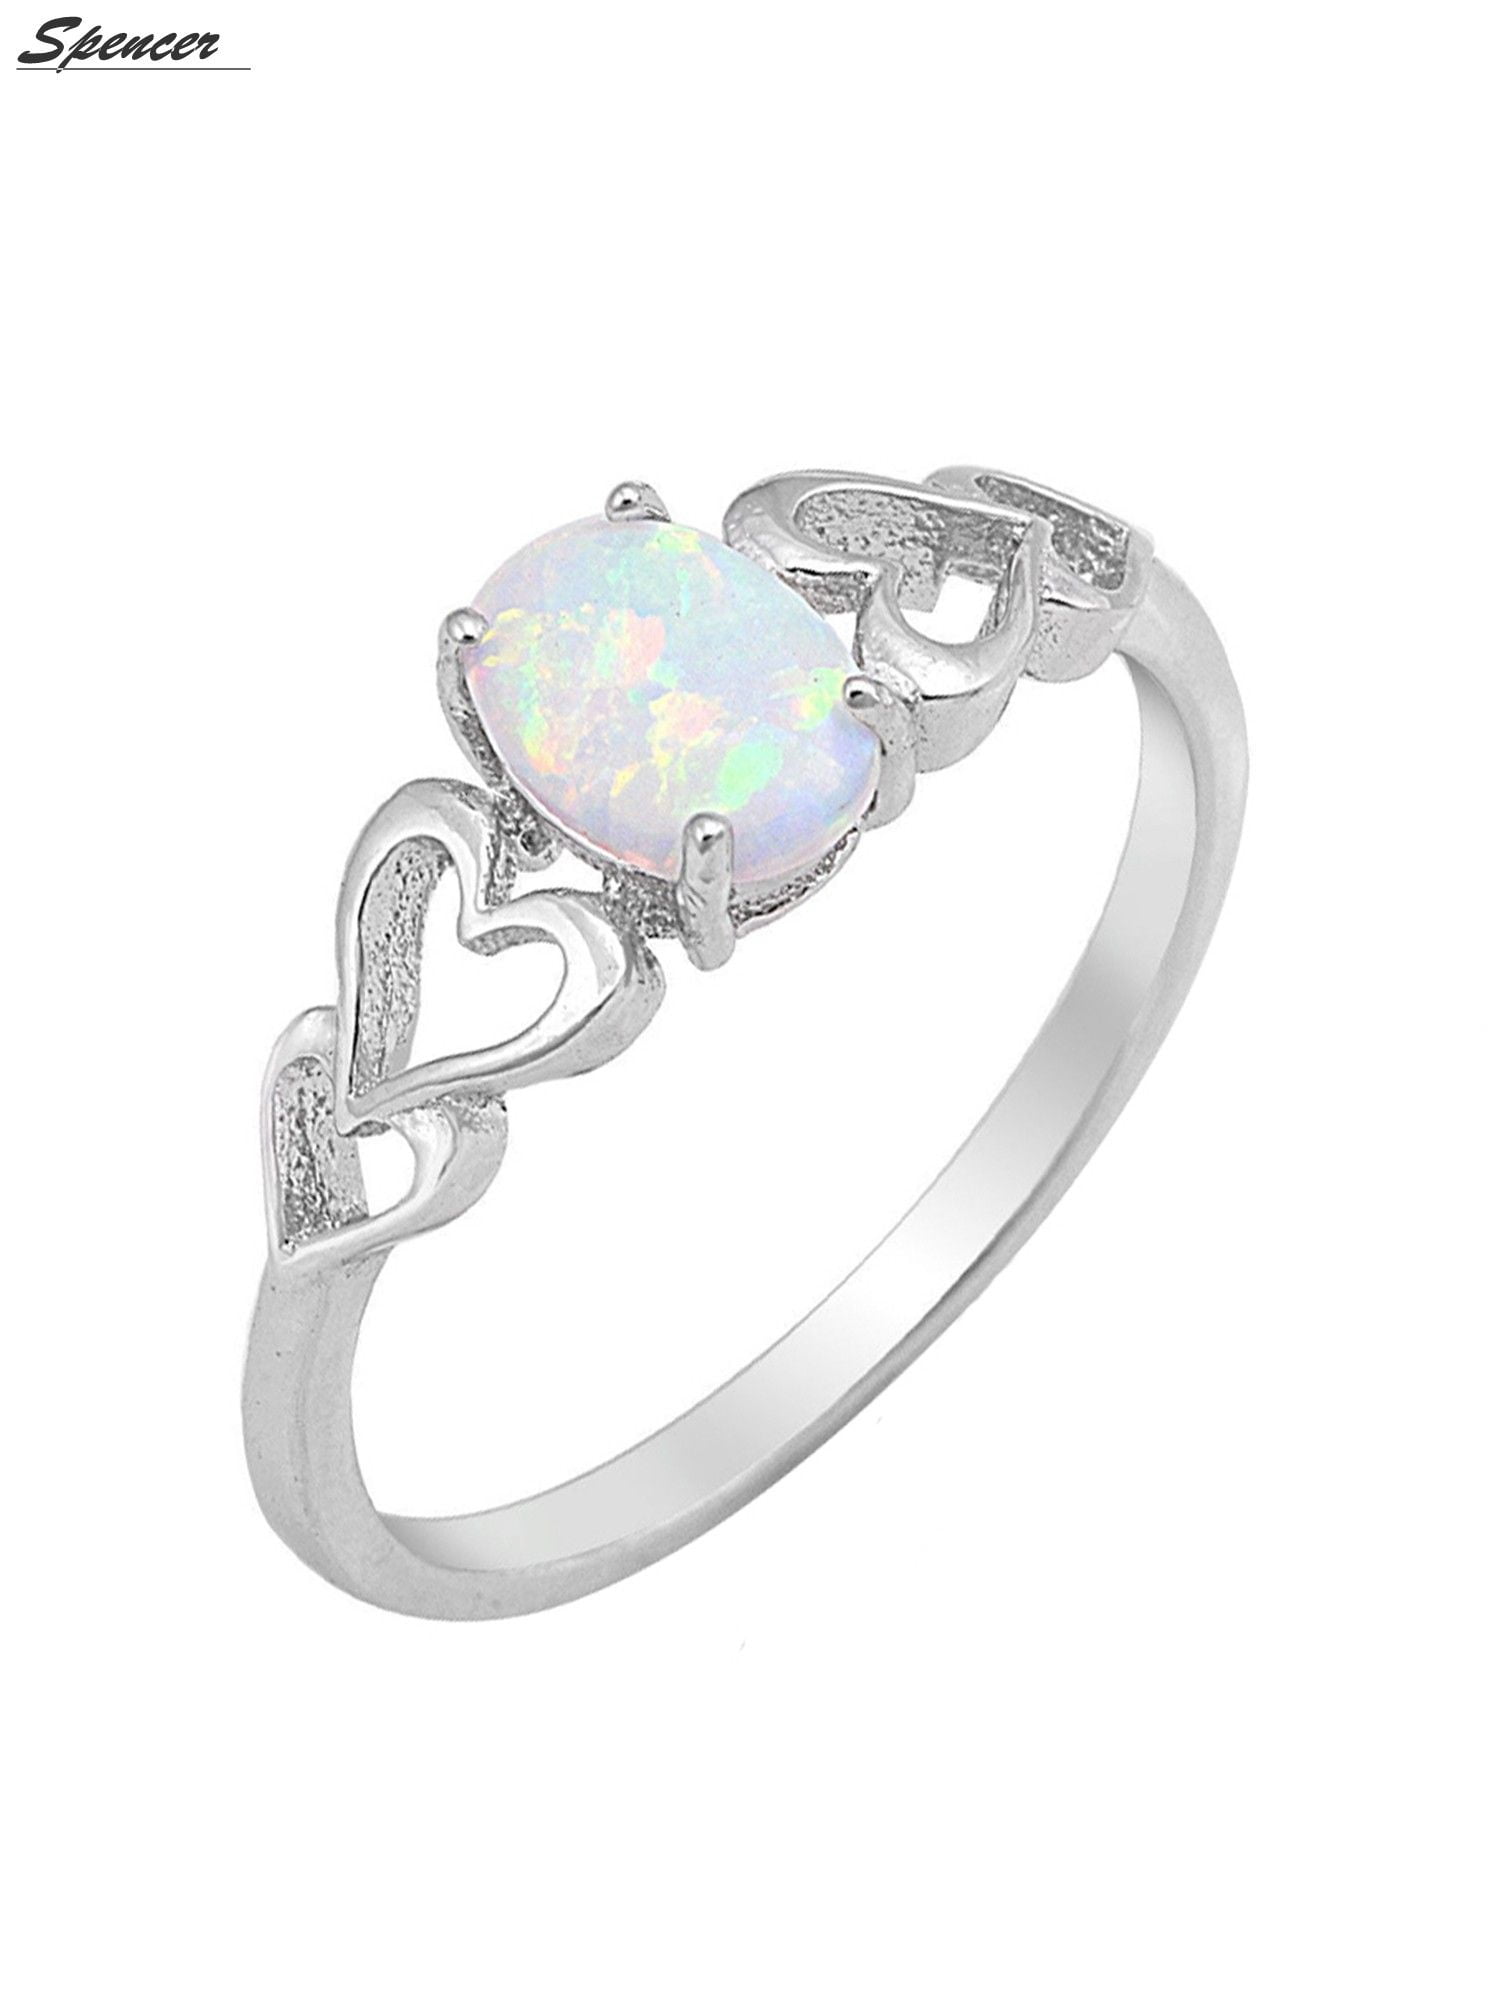 925 Silver Plated White Opal CZ Woman Jewelry Wedding Engagement Ring Size 6-10 9